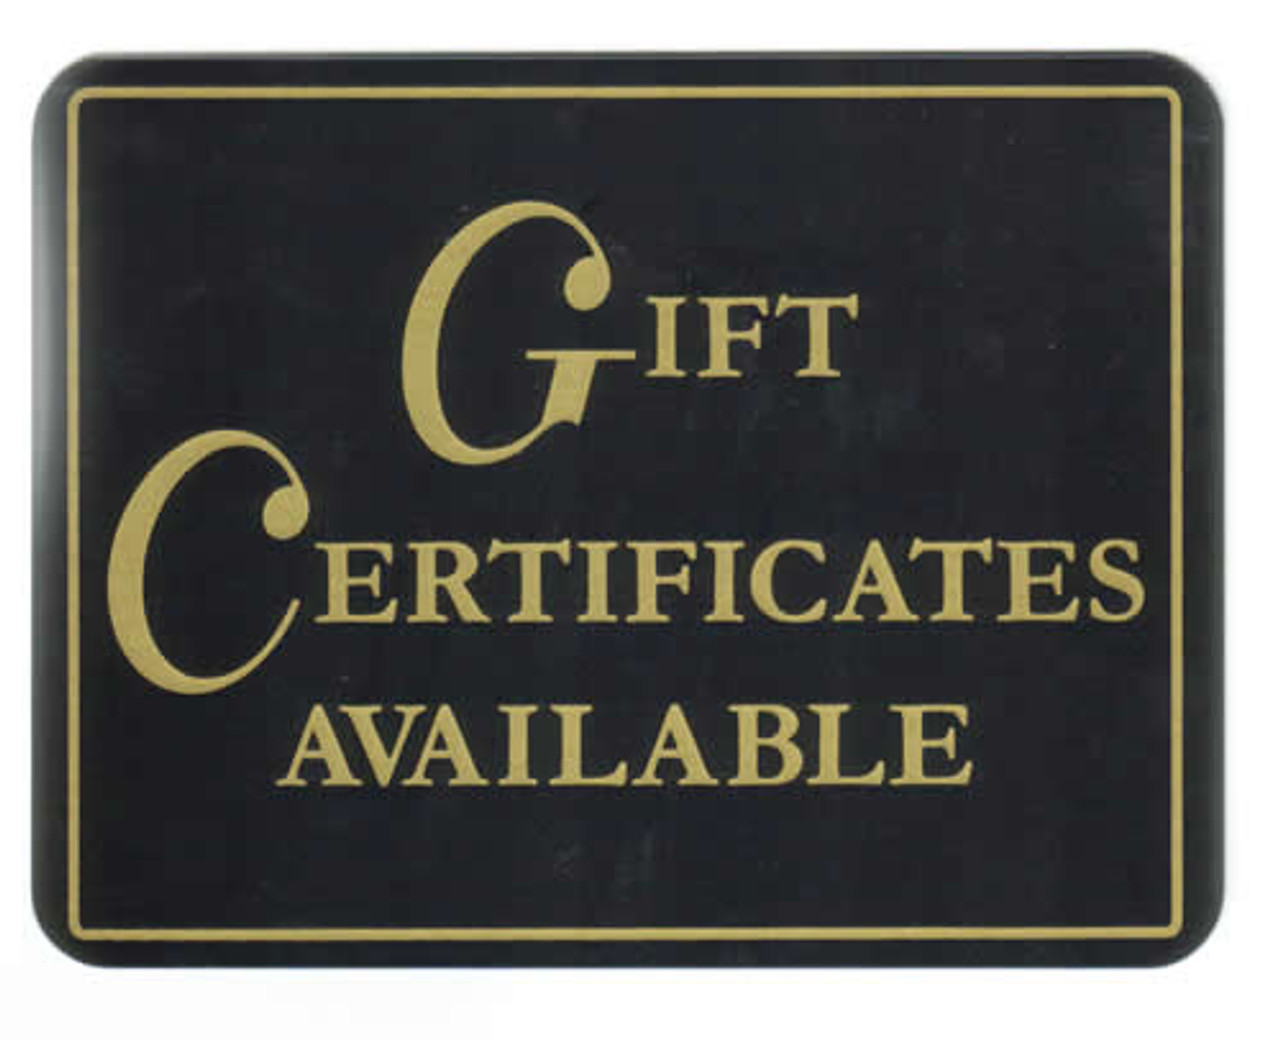 Gift Certificates Available Single sided Policy Card 7"w x 5-1/2"h - ea.